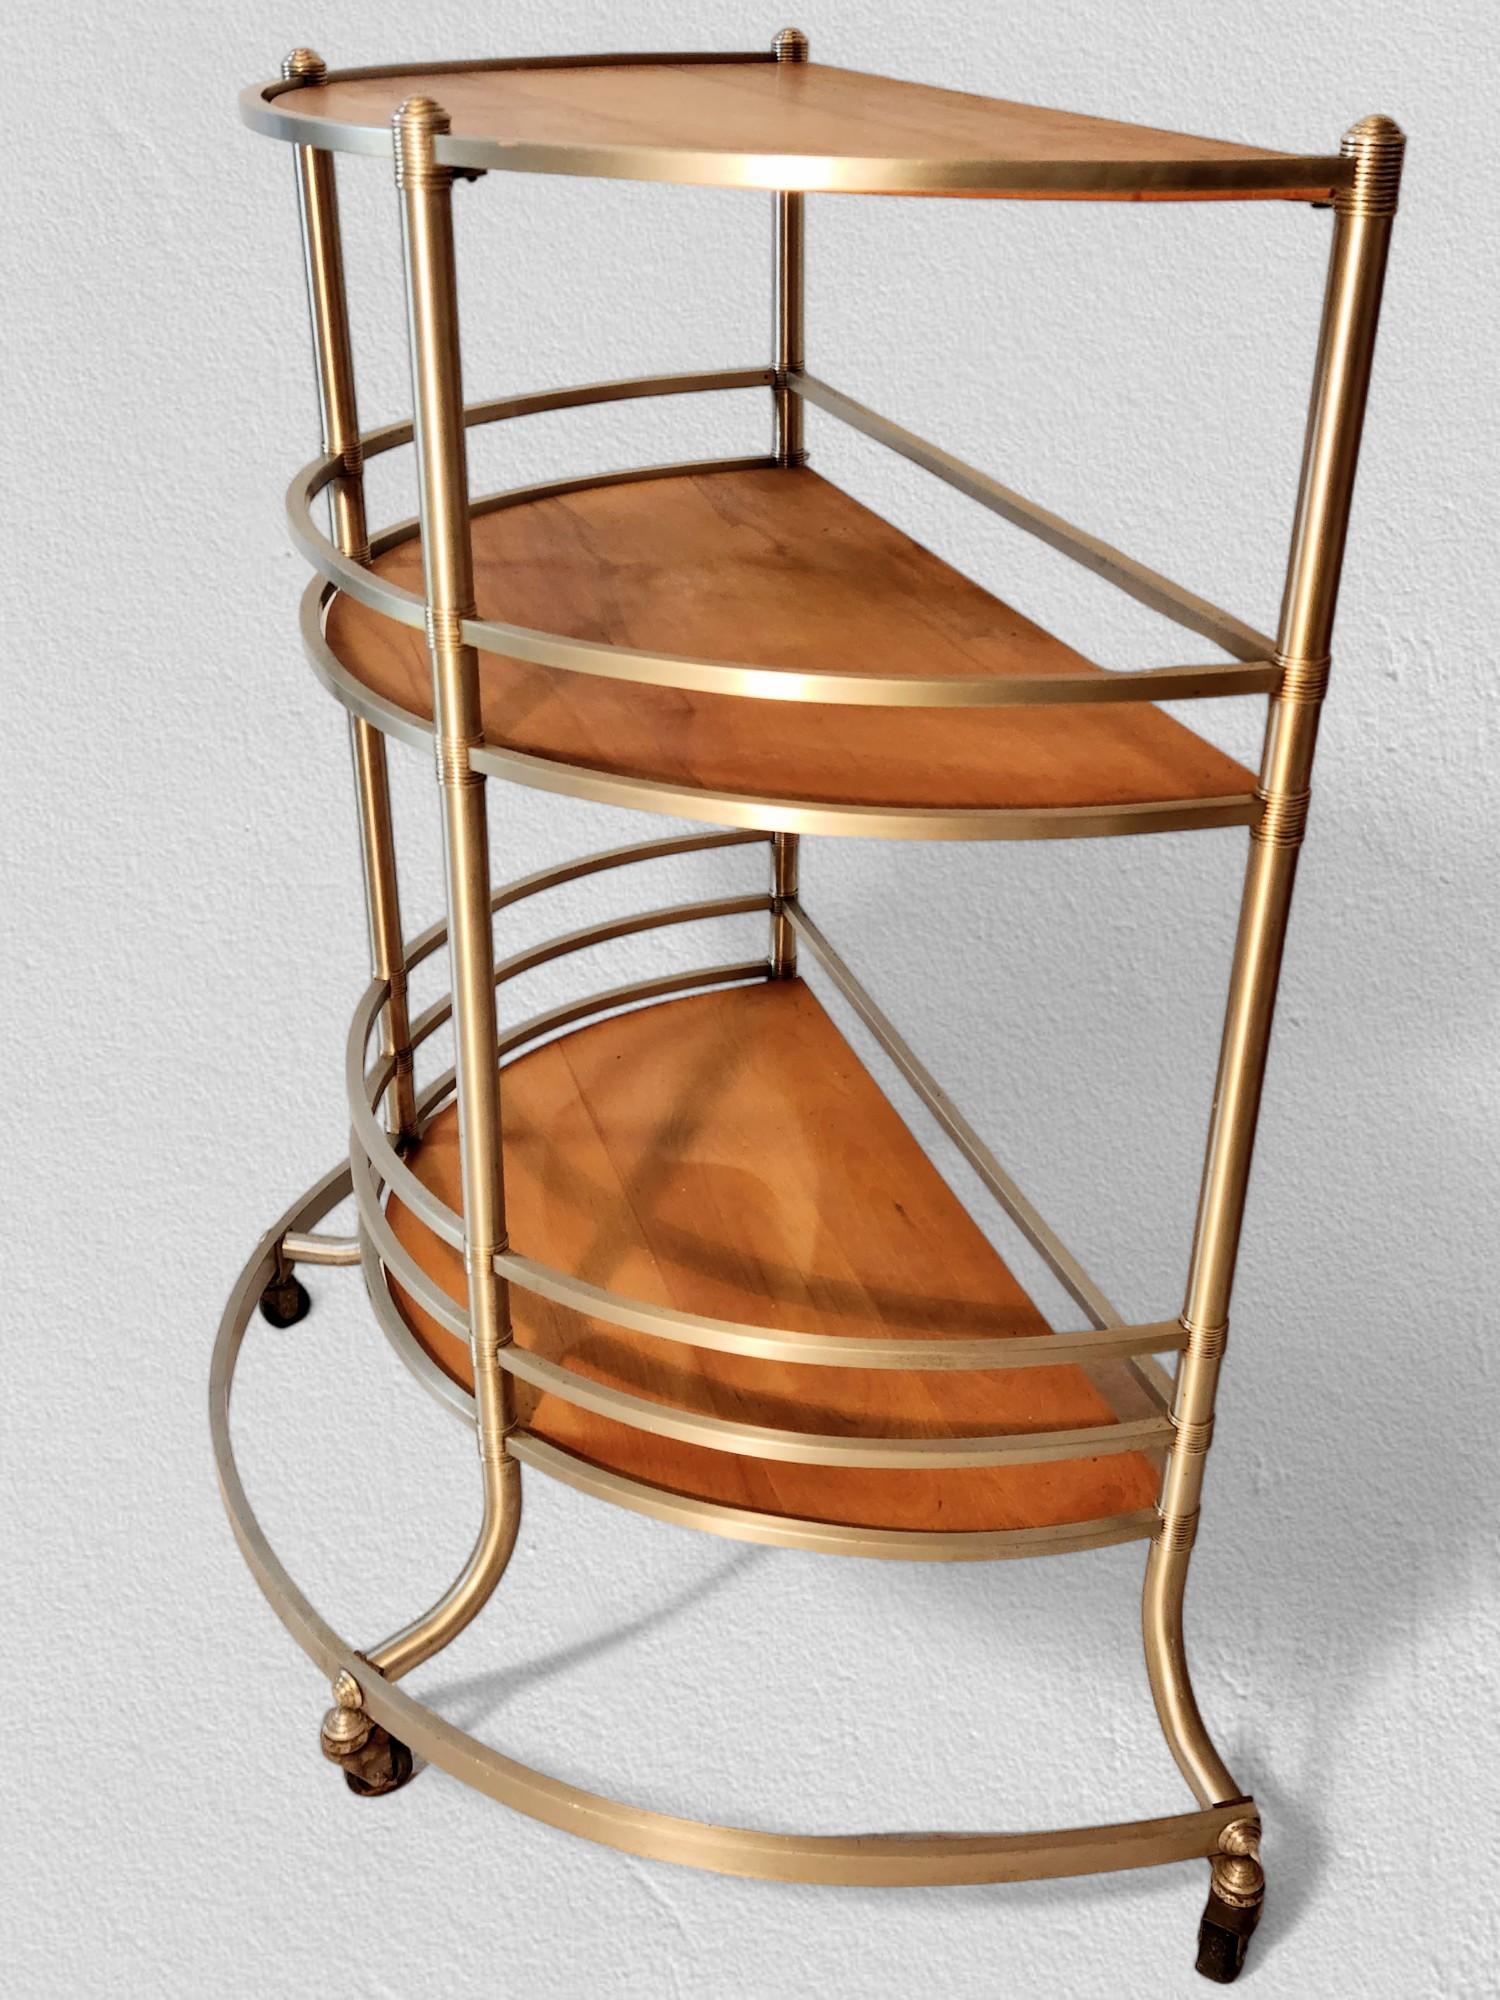 Anodized Warren McArthur Rolling Bar Cart Rome Ny C, 1933/34 For Sale